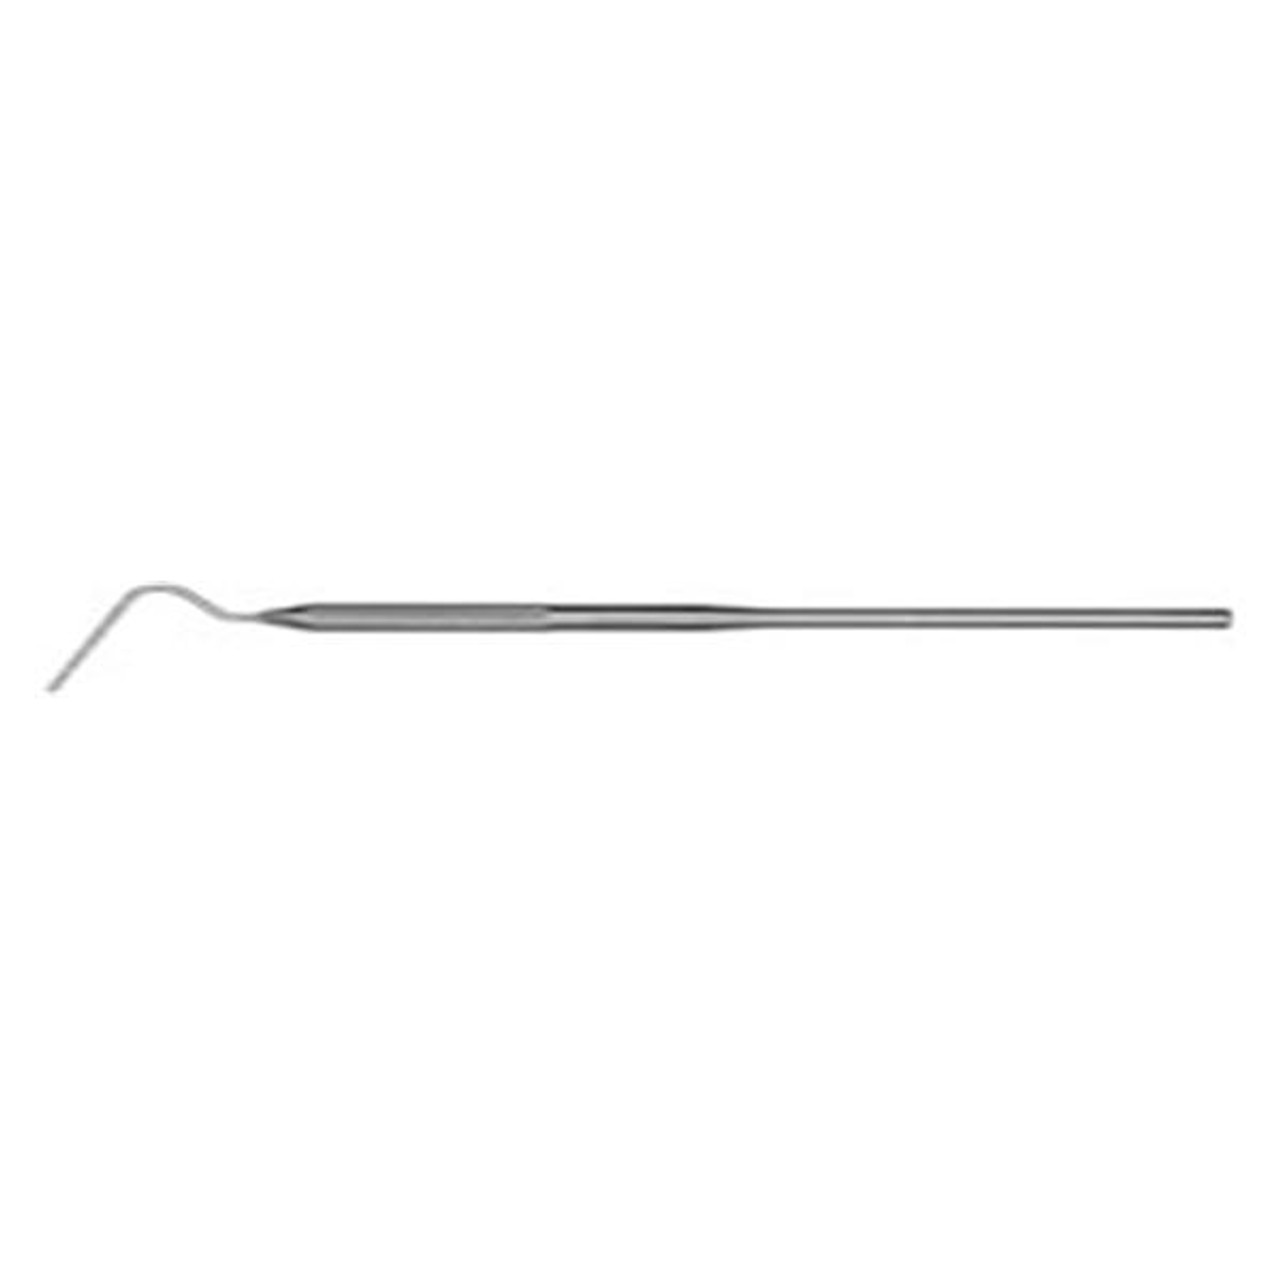 Hu-Friedy - 11-1/2 Single End Root Canal Plugger - (P) #32 Round Handle